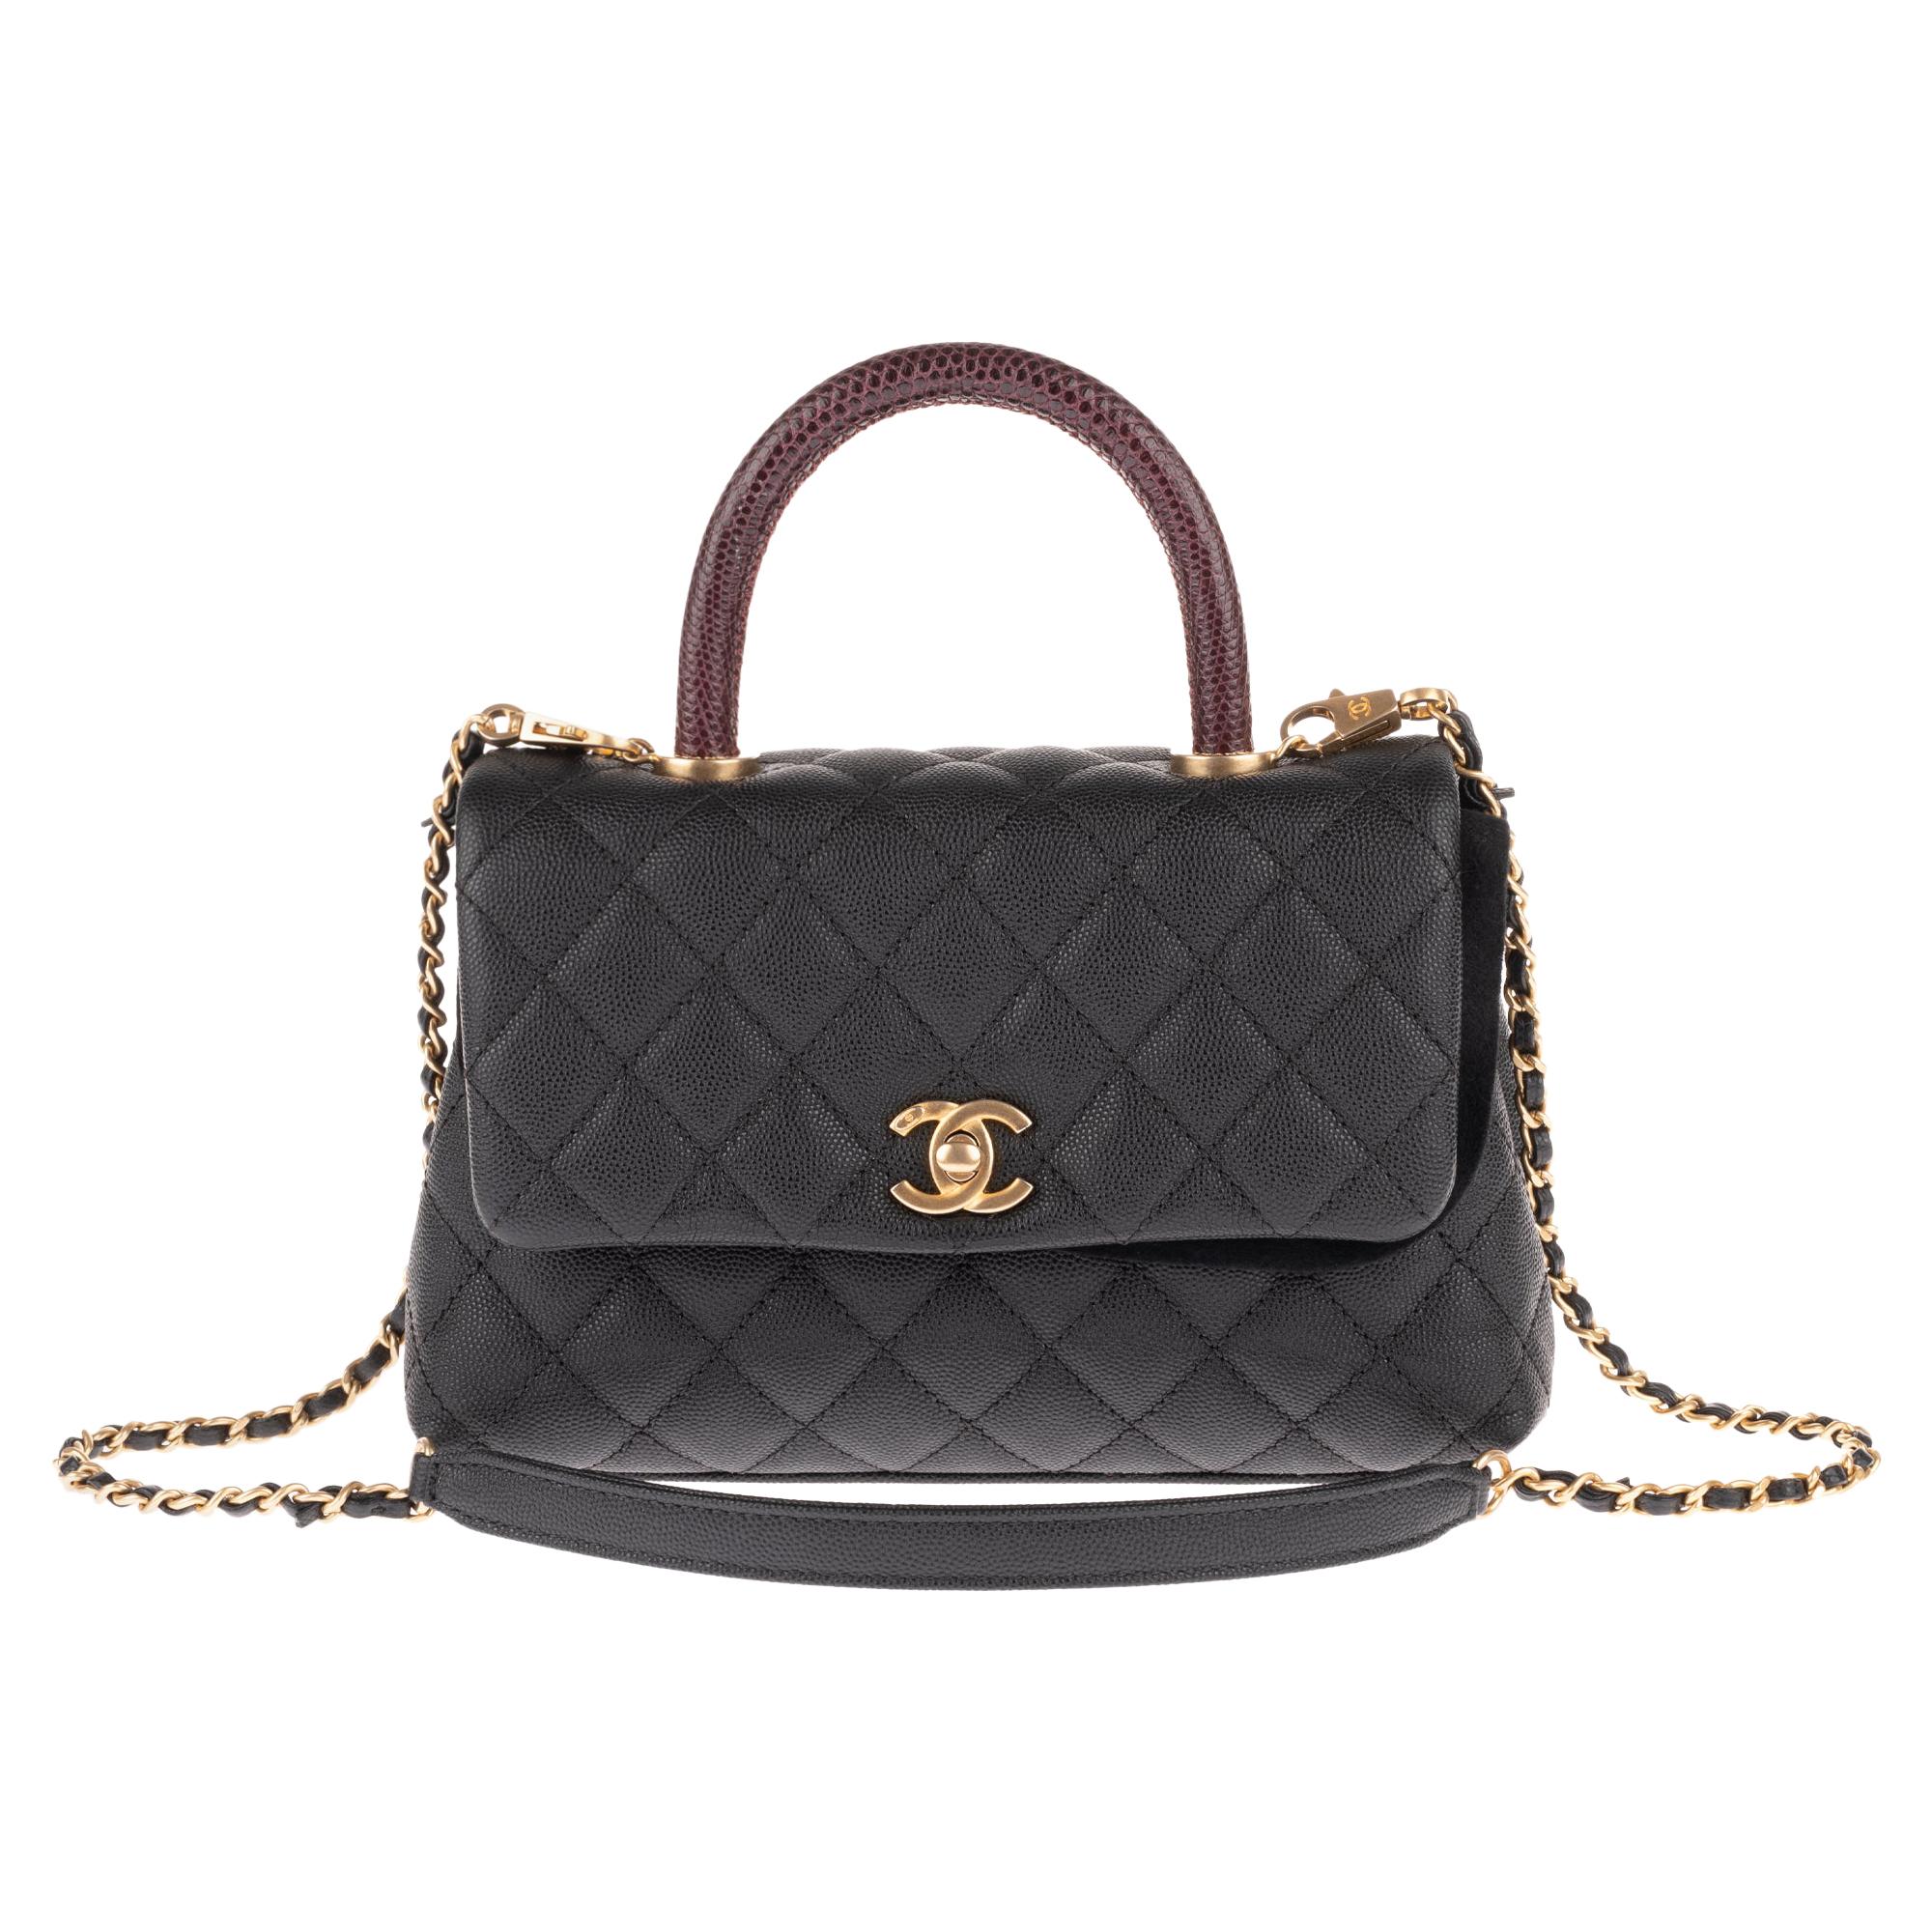 Coco handle leather handbag Chanel Black in Leather - 34583475